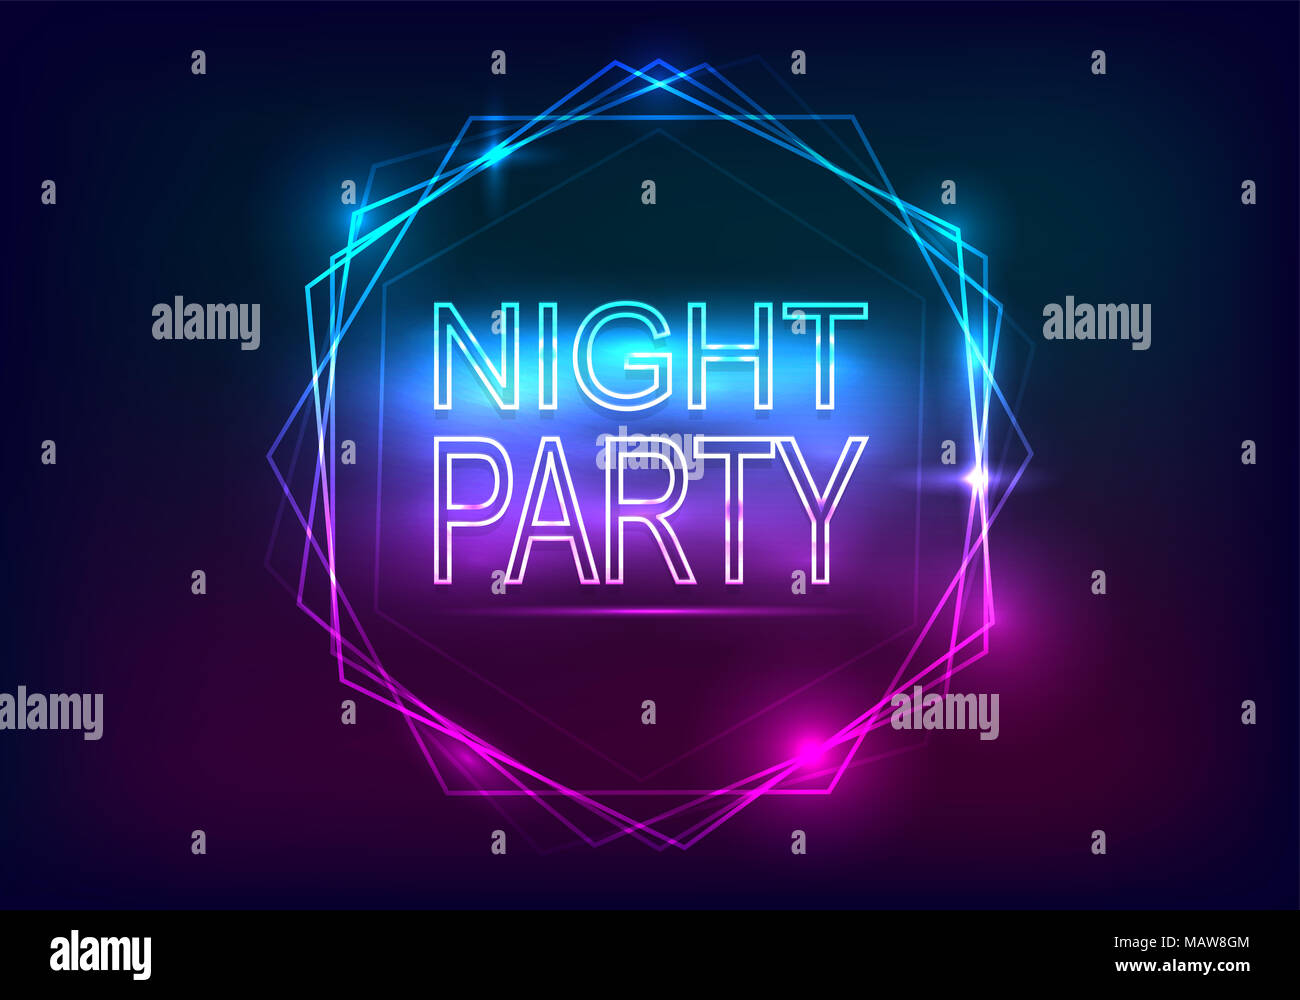 Night Party advertisement template. Neon style with rays of light and a frame of neon Stock Photo